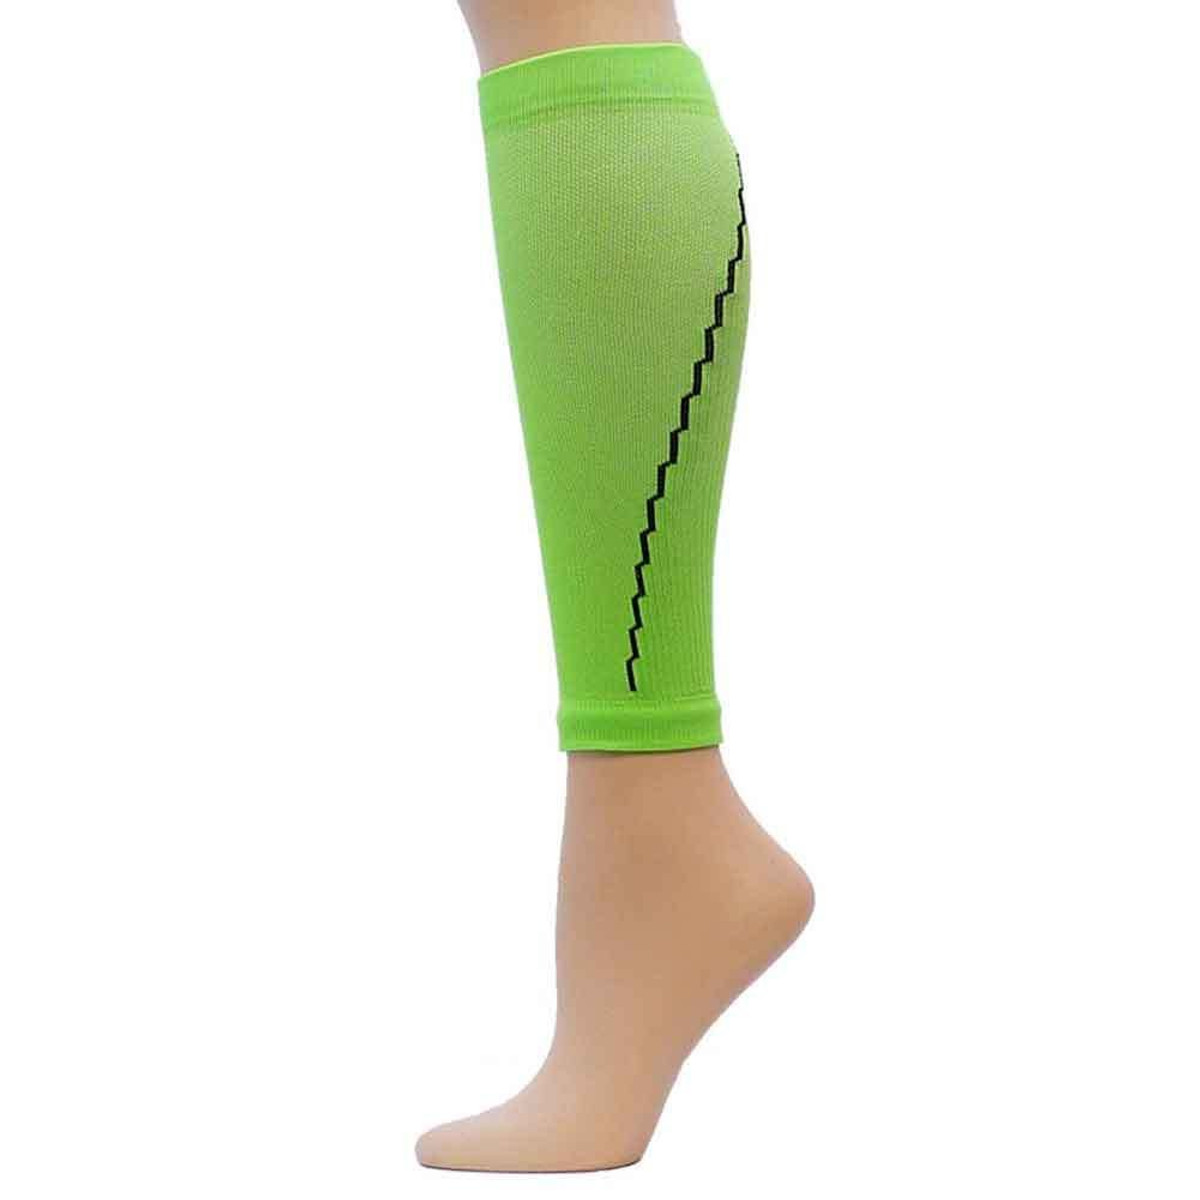 Neon Solid Compression Leg Sleeves - Neon Green